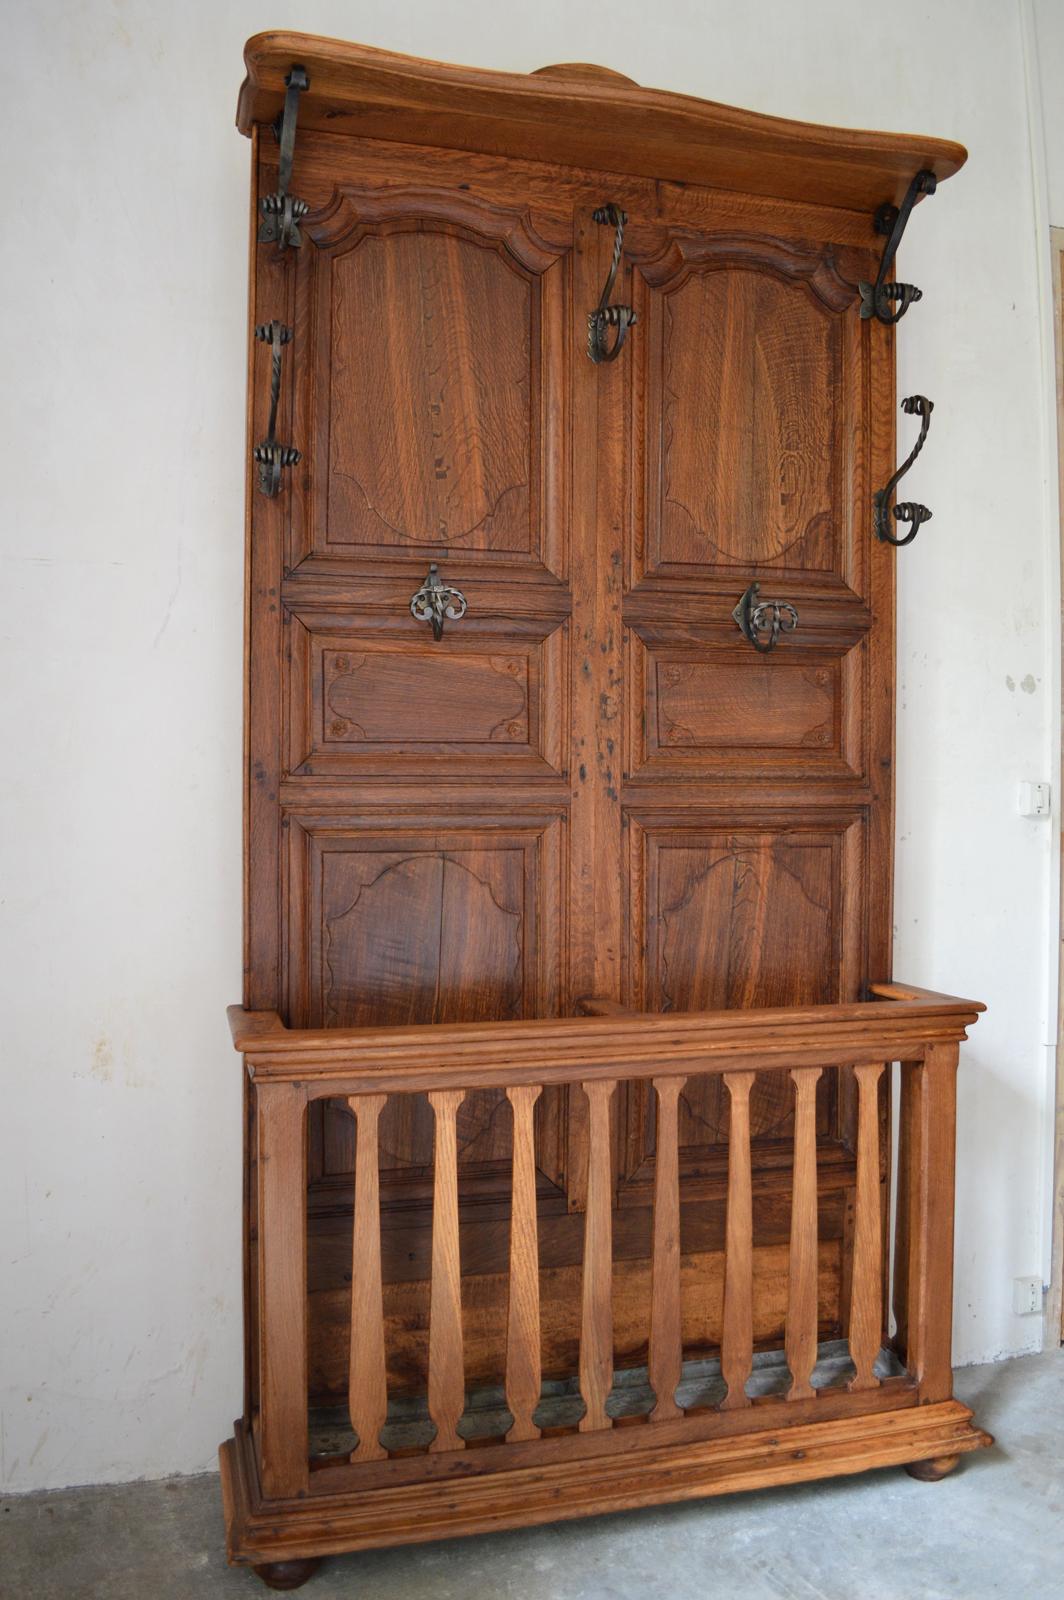 Superb coat rack in carved chestnut and wrought iron hooks.

It is a beautiful and very original coat rack: the bottom is made of two old cabinet doors from the late 18th-early 19th century. These doors have been used by a talented cabinetmaker to